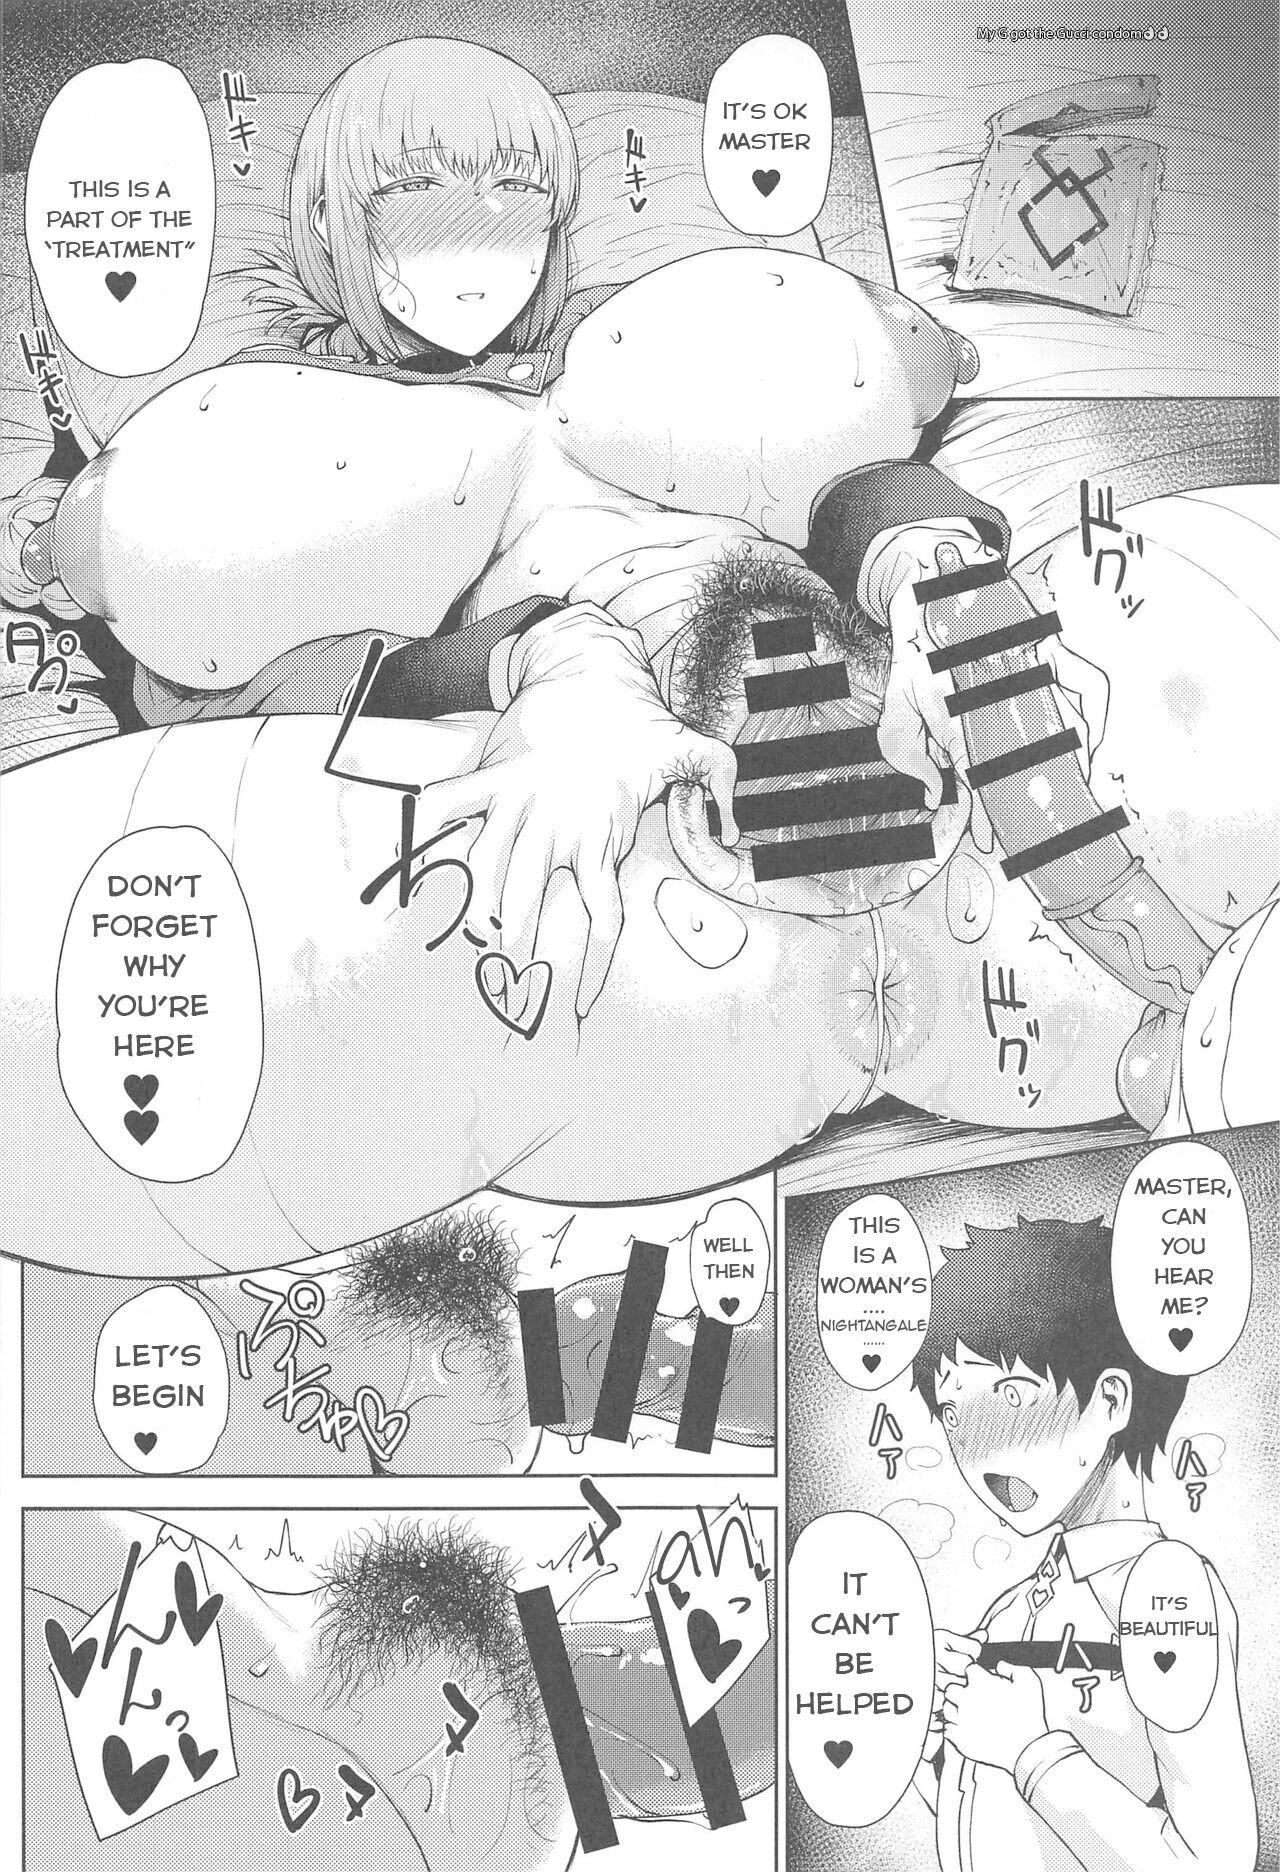 Jav Chiryou desu - Fate grand order Brother - Page 7